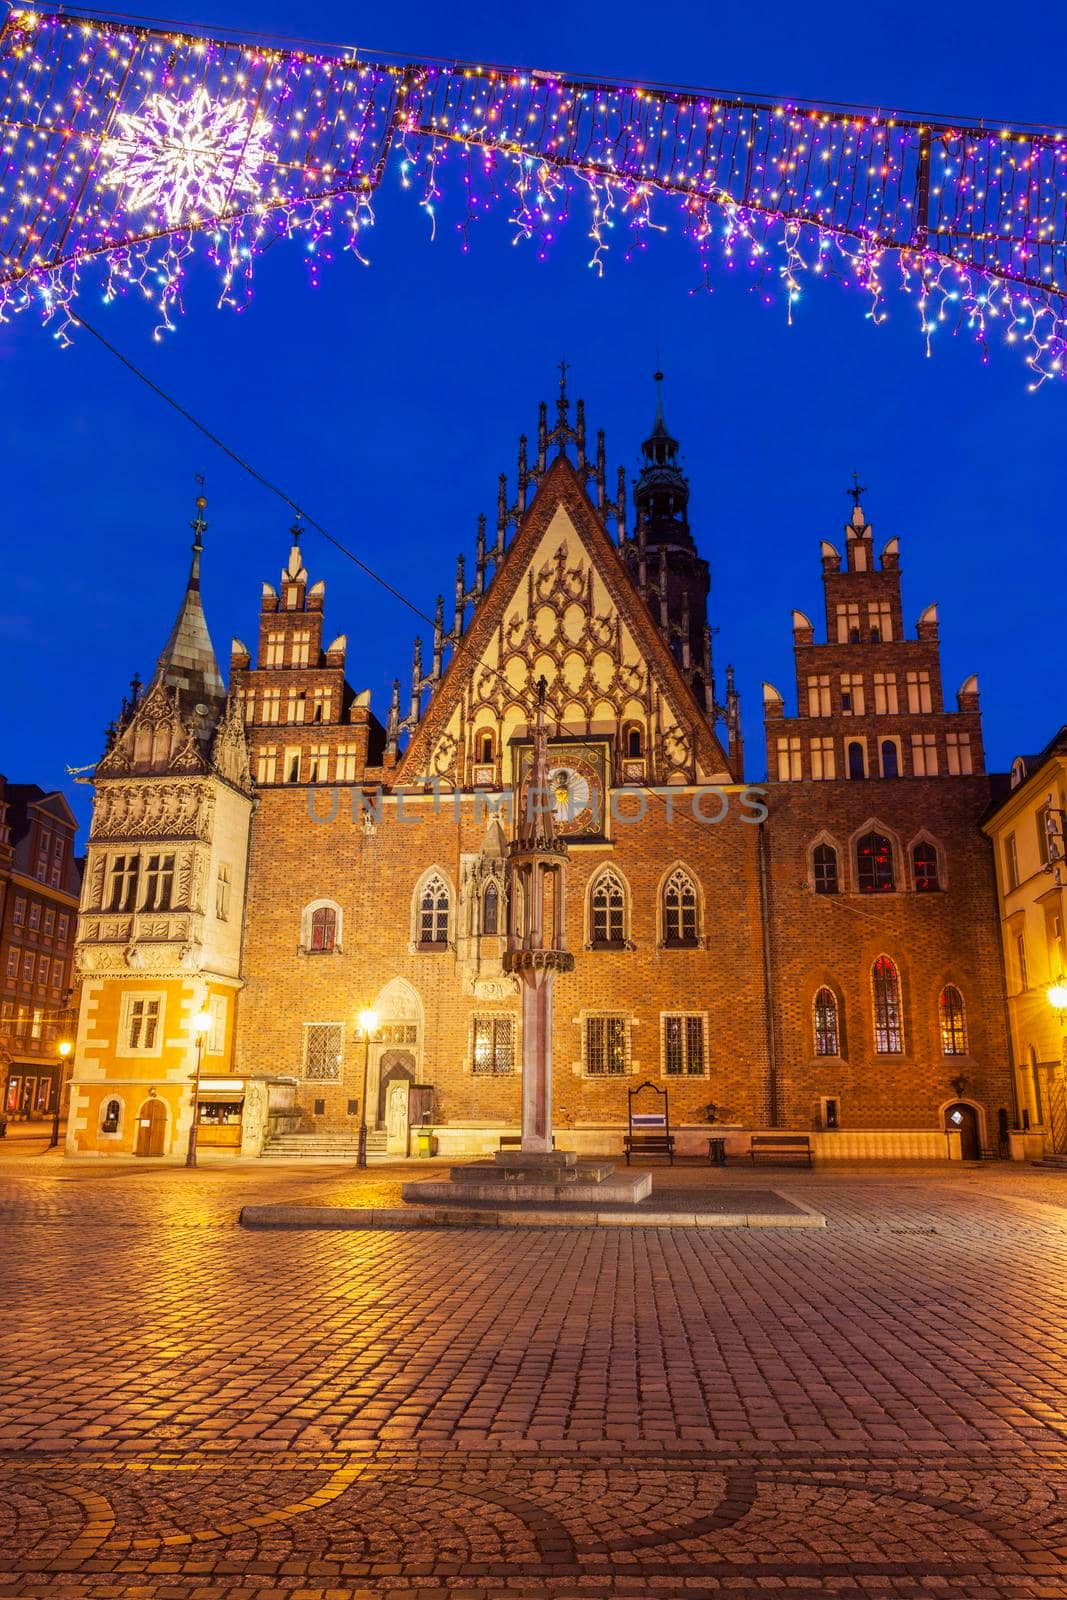 Old City Hall on Market Square in Wroclaw by benkrut